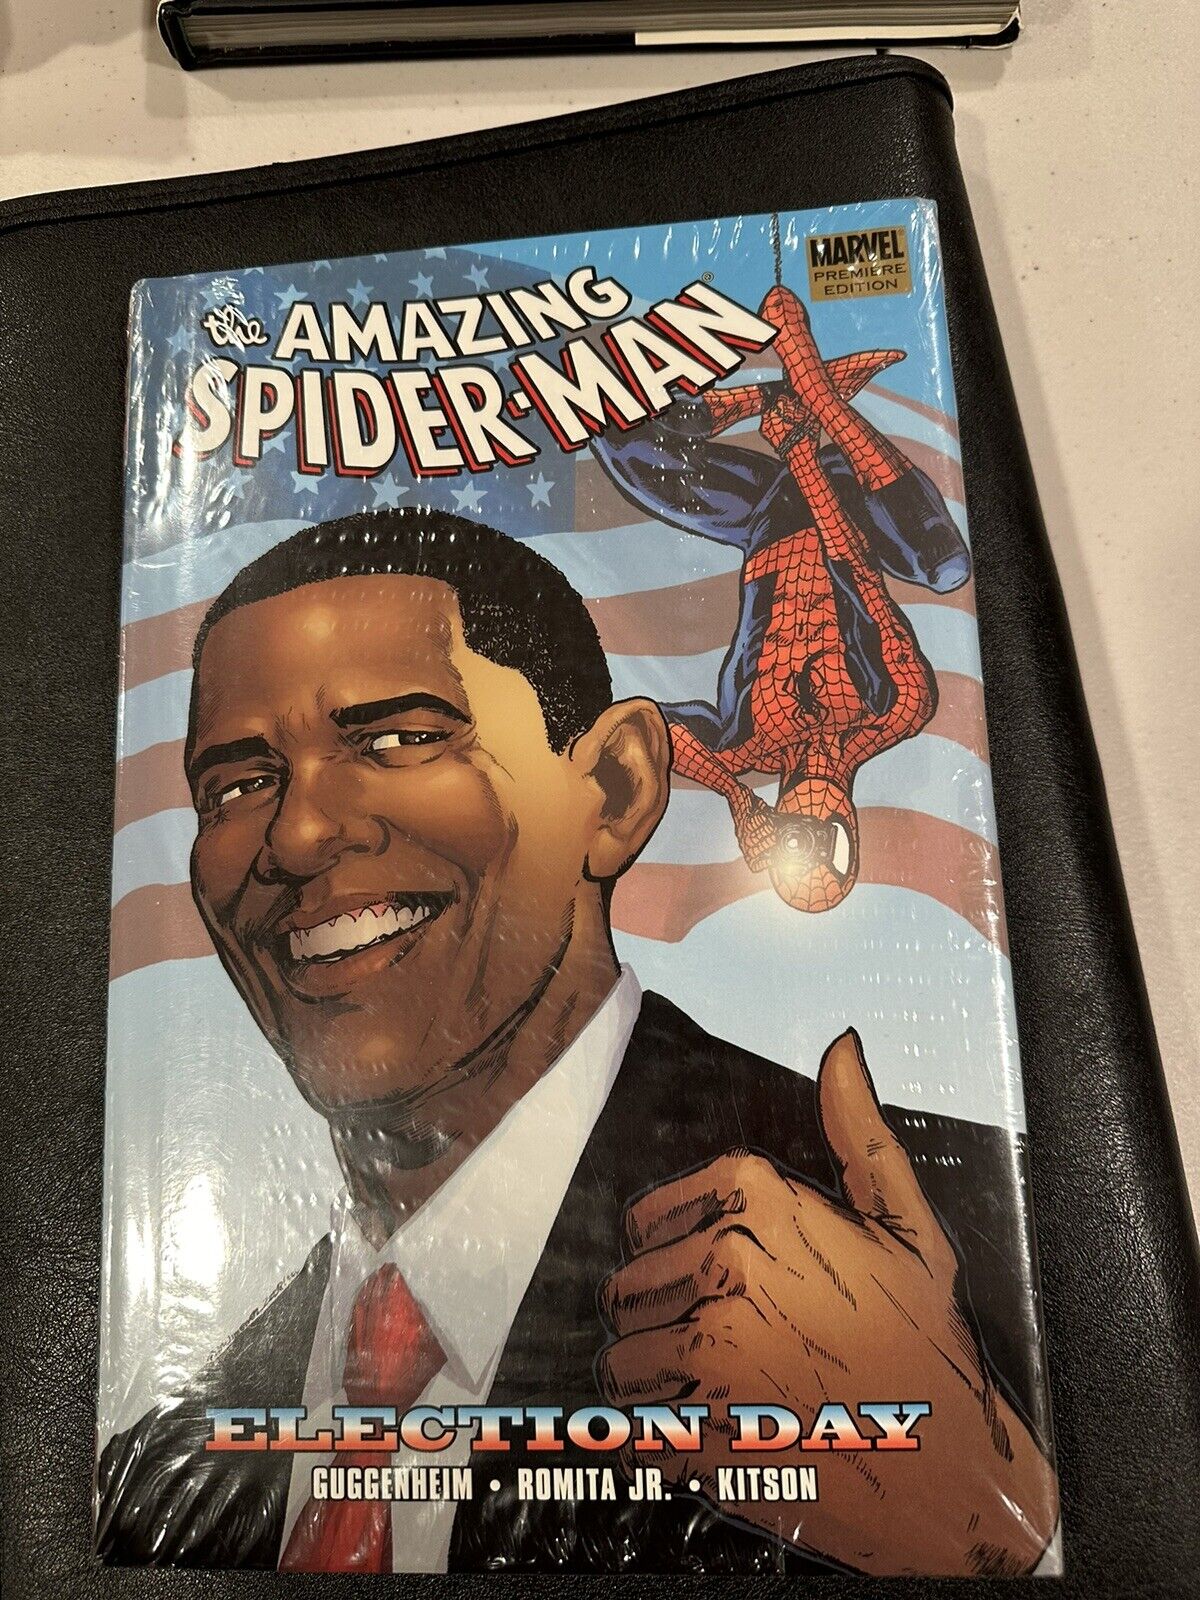 The Amazing Spider-Man Election Day (Marvel Premiere Edition, 1st Print, 2009)